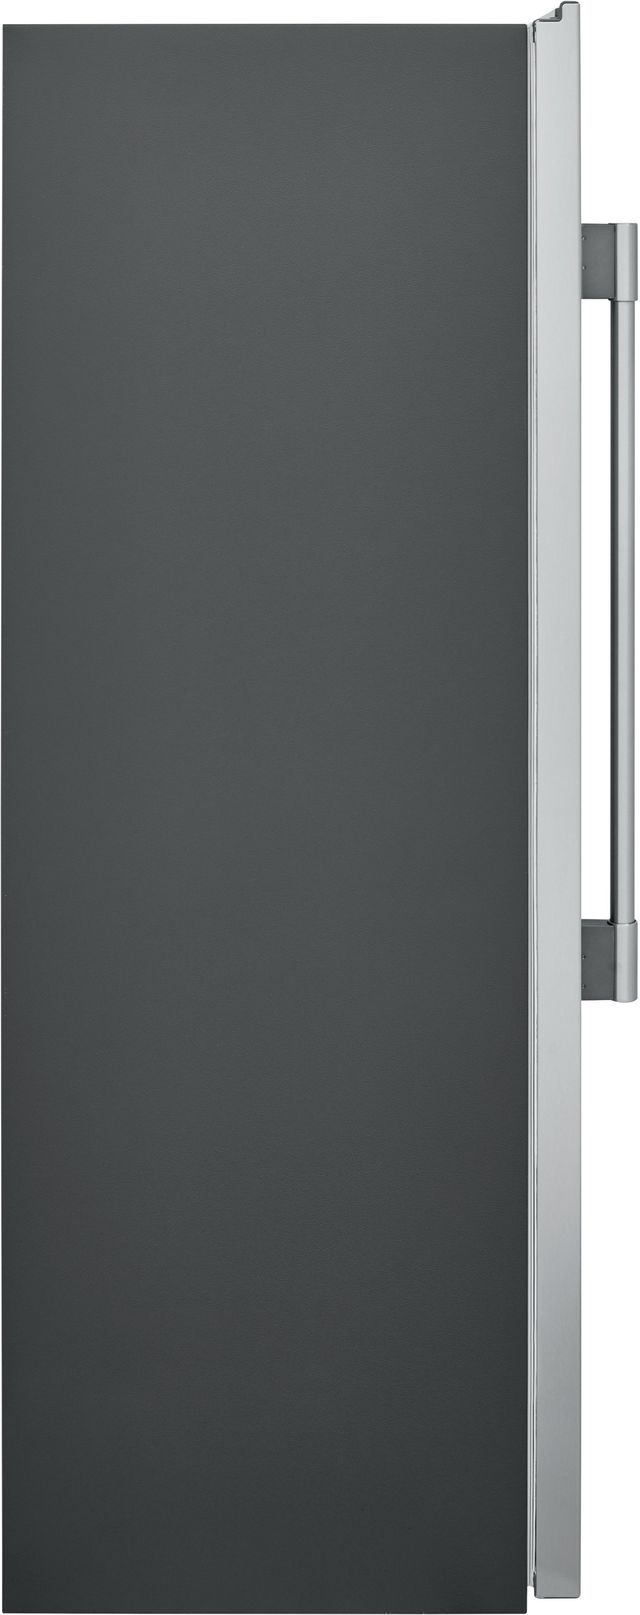 Frigidaire Professional® 18.6 Cu. Ft. Stainless Steel All Refrigerator 5